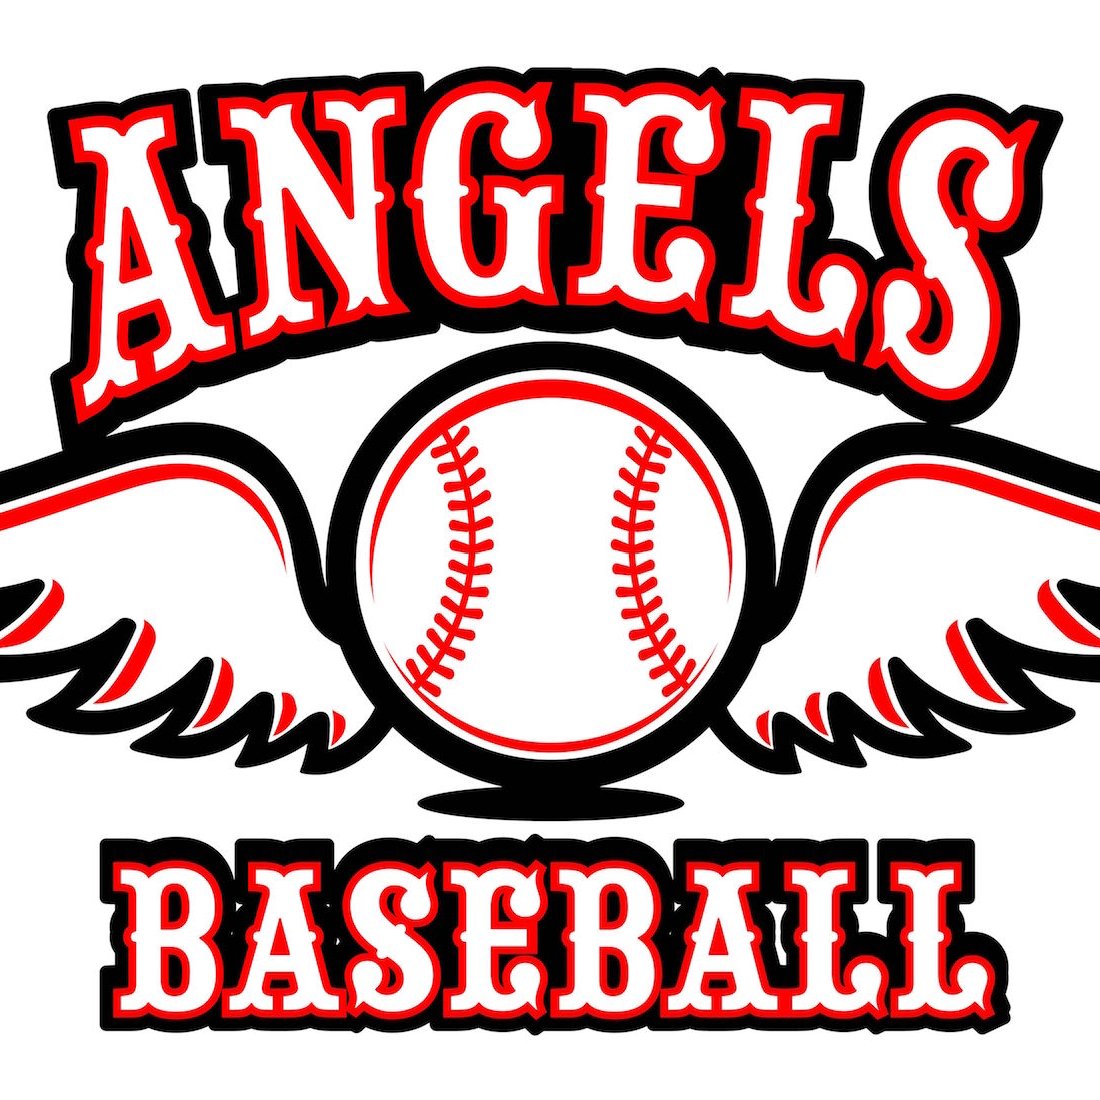 Angels Baseball provides youth athletes with the most conducive atmosphere to grow their potential in the classroom, sport and life. #youthdevelopment